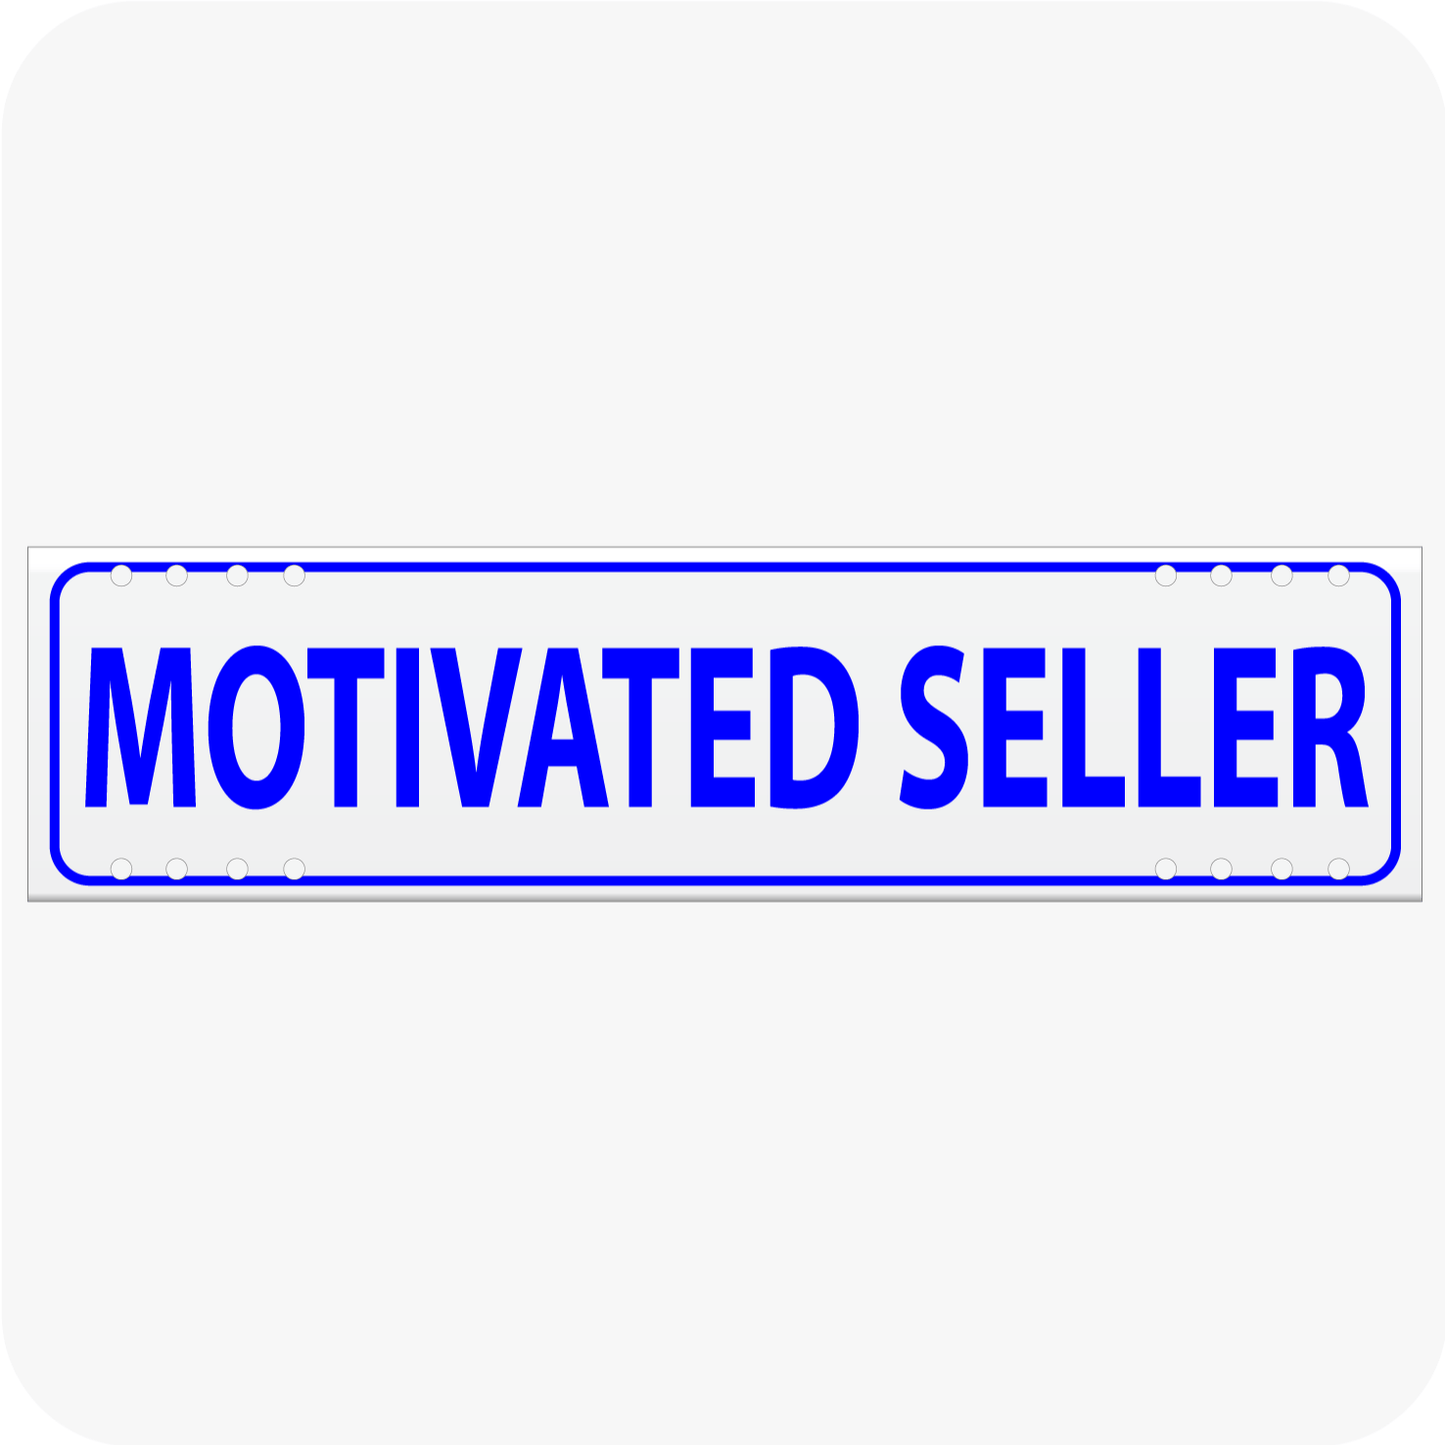 Motivated Seller 6 x 24 Corrugated Rider - Blue